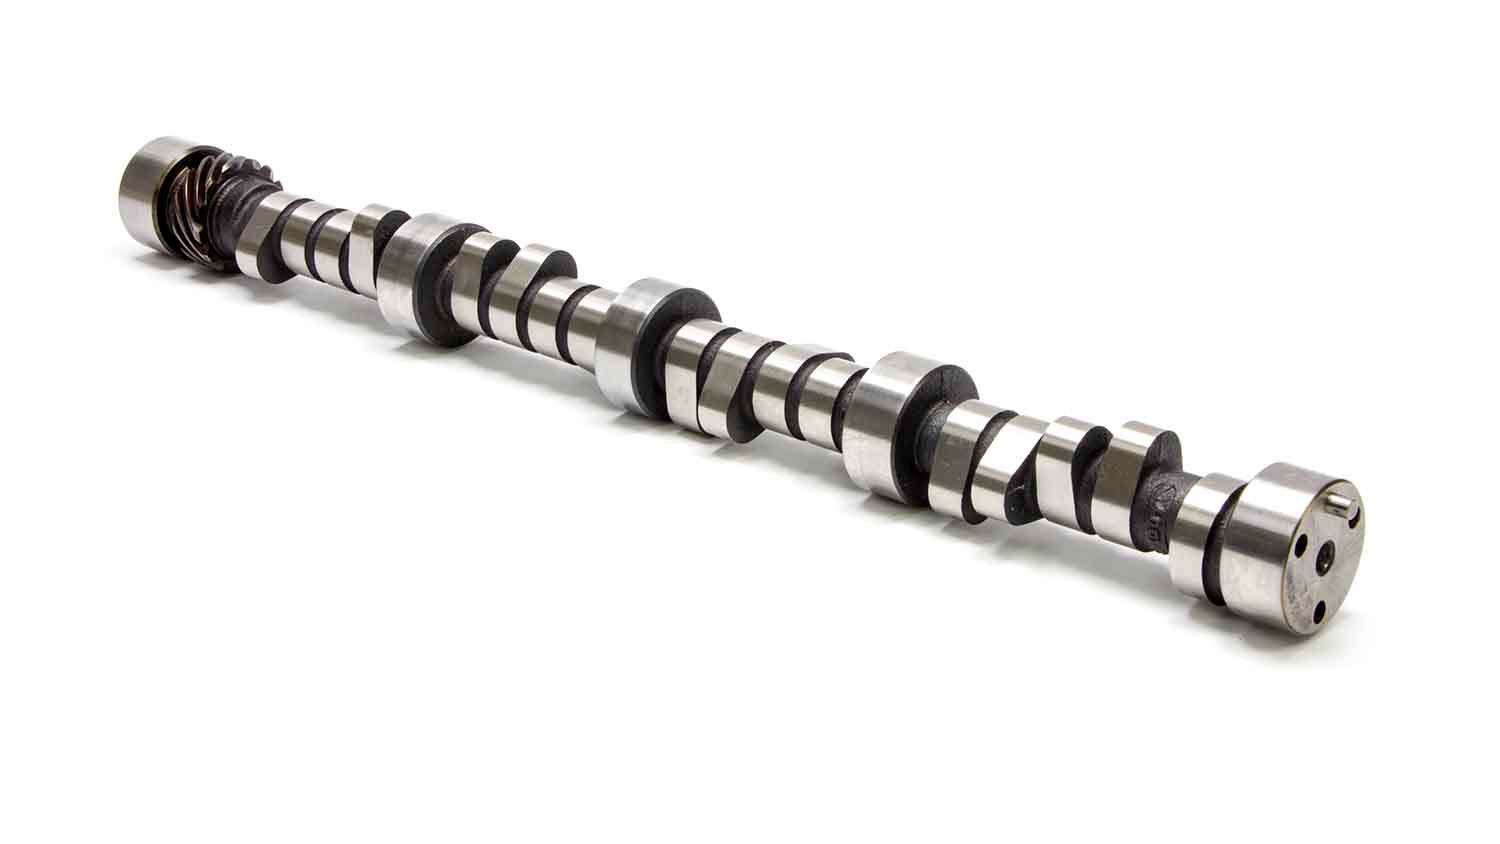 Lunati Cams 20120712 Camshaft, Voodoo Retro-Fit, Hydraulic Roller, Lift 0.535 / 0.550 in, Duration 282 / 290, 110 LSA, 2400 / 6400 RPM, Small Block Chevy, Each